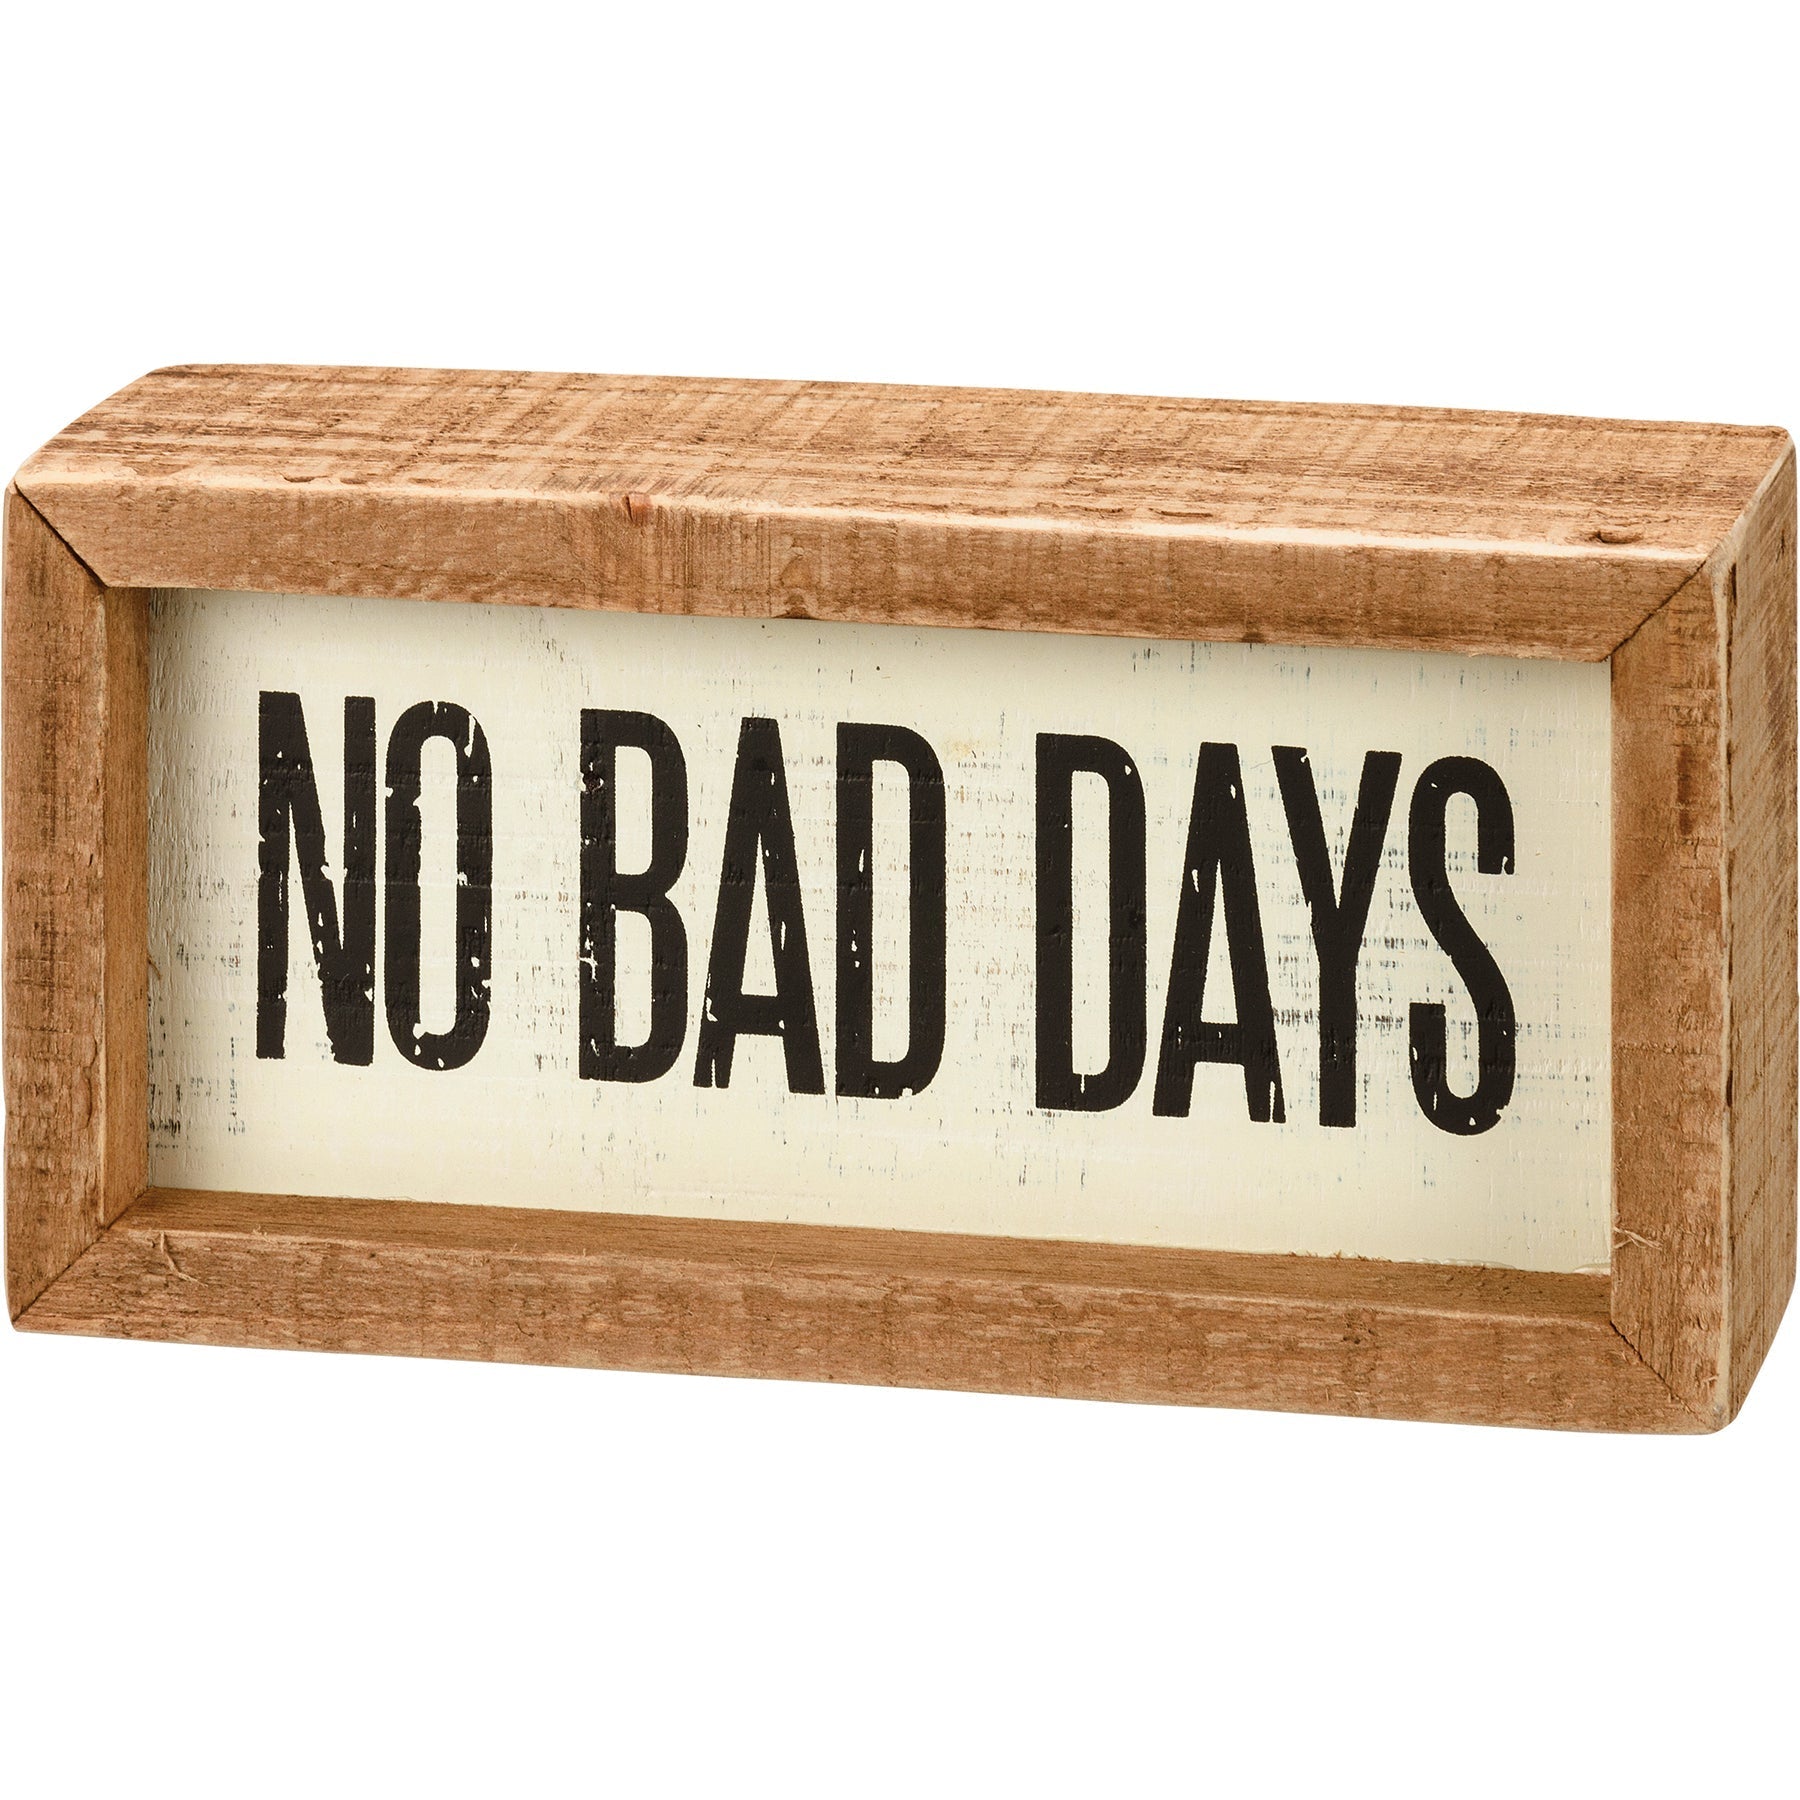 No Bad Days Wooden Inset Box Sign | Rustic Farmhouse